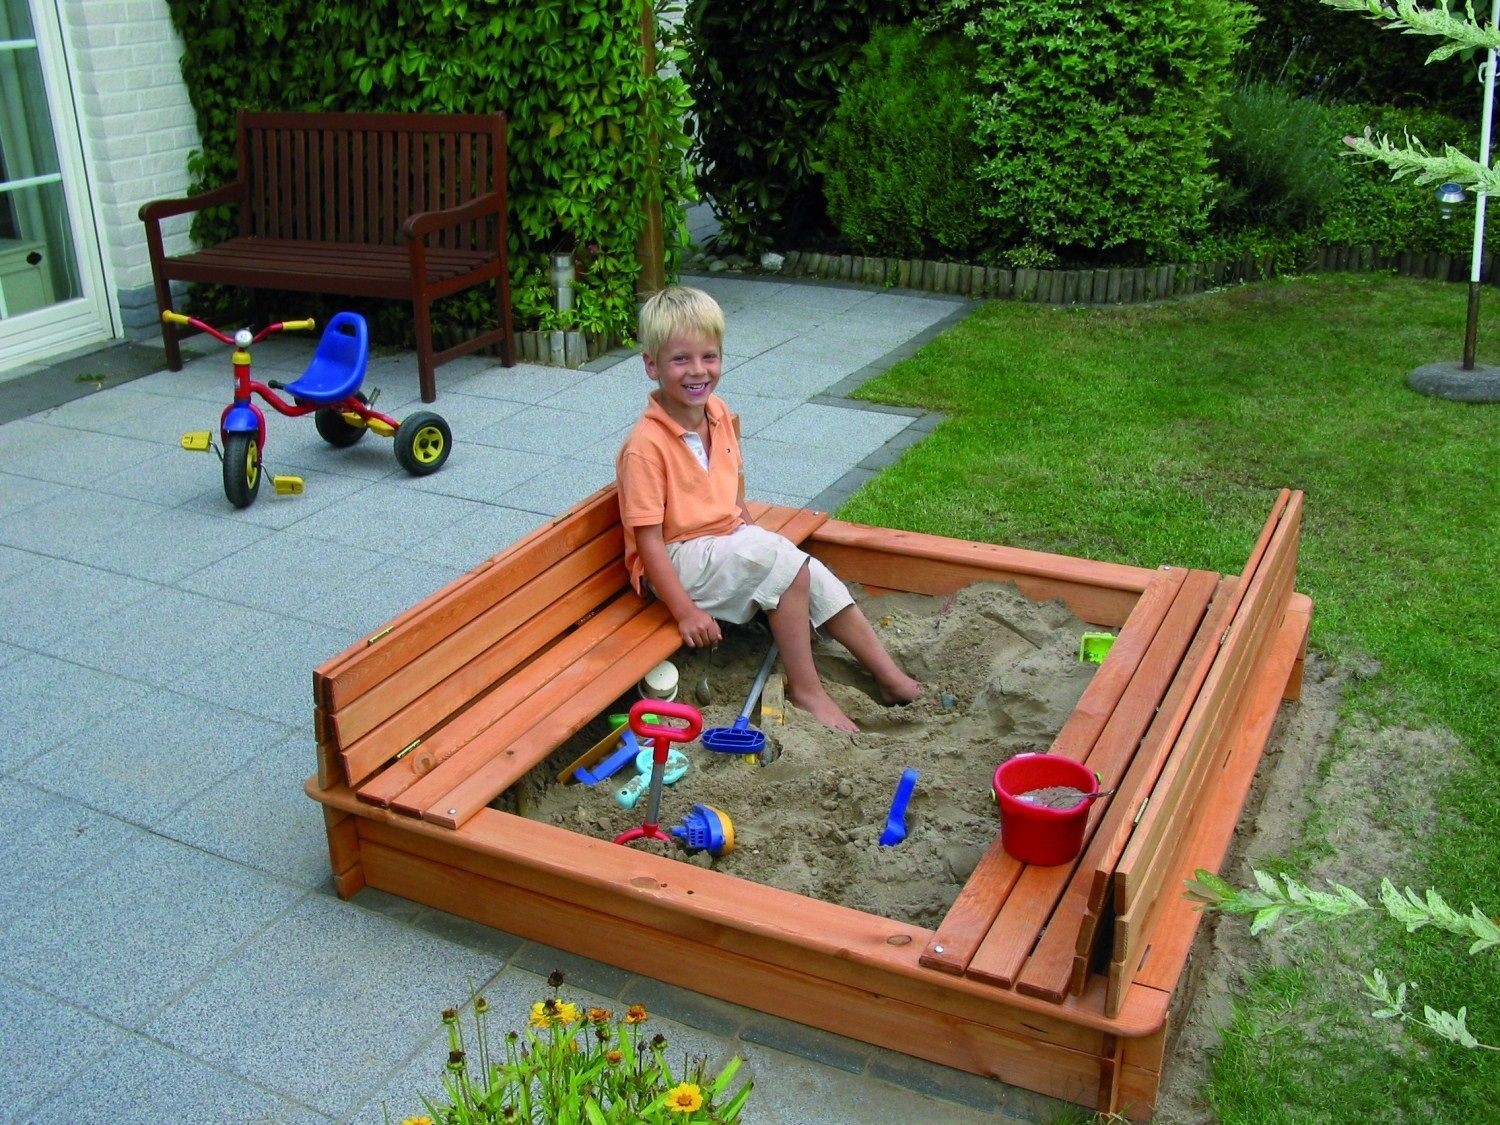 Details about   Dollhouse Miniature Outdoor Stained Wood Sandbox with Sand & Corner Seats AM305 